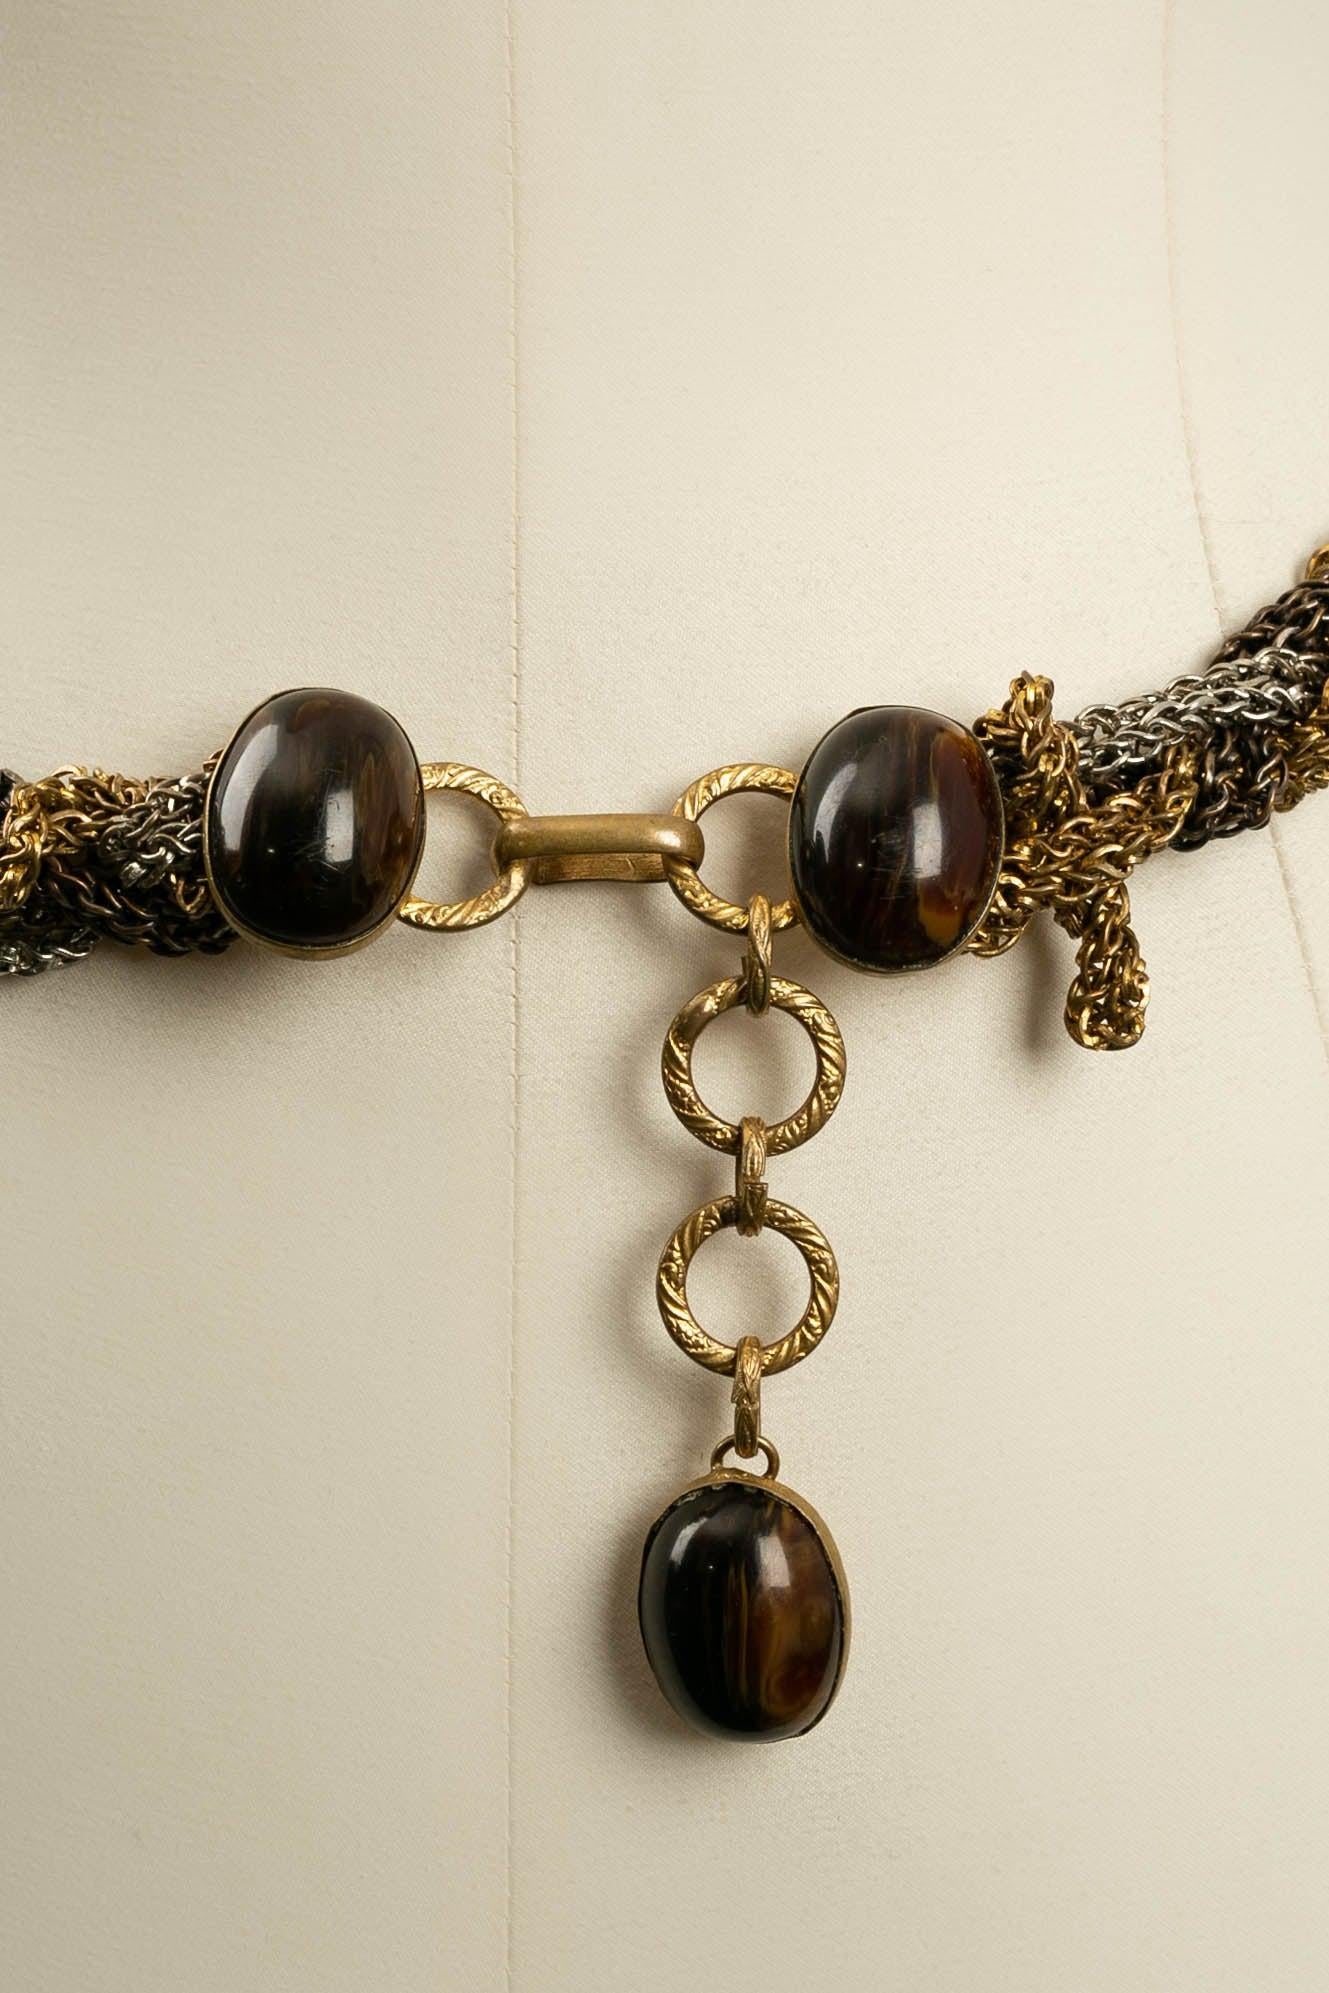 Yves Saint Laurent Intertwined Chains Belt, 1960s-1970 For Sale 2